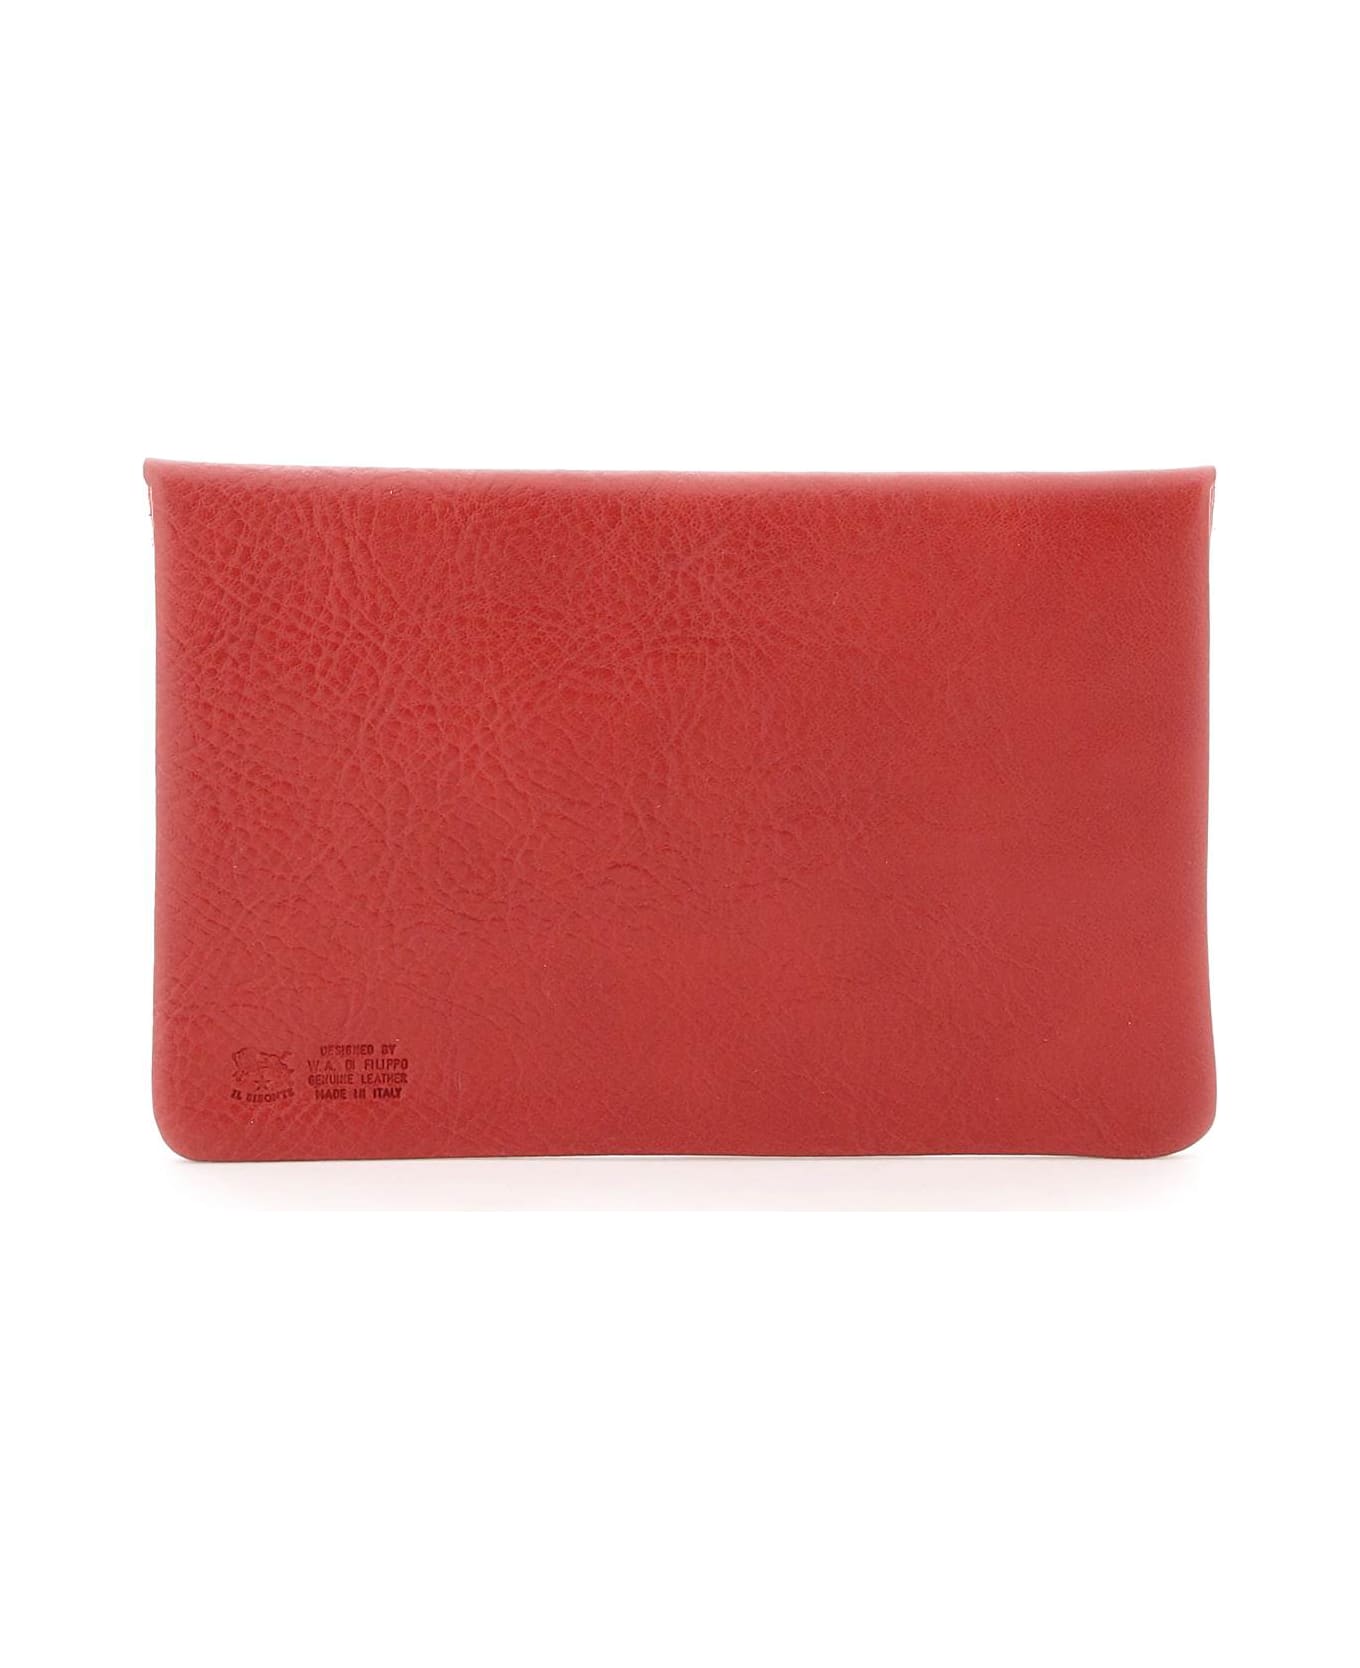 Il Bisonte Leather Pouch - ROSSO (Red)